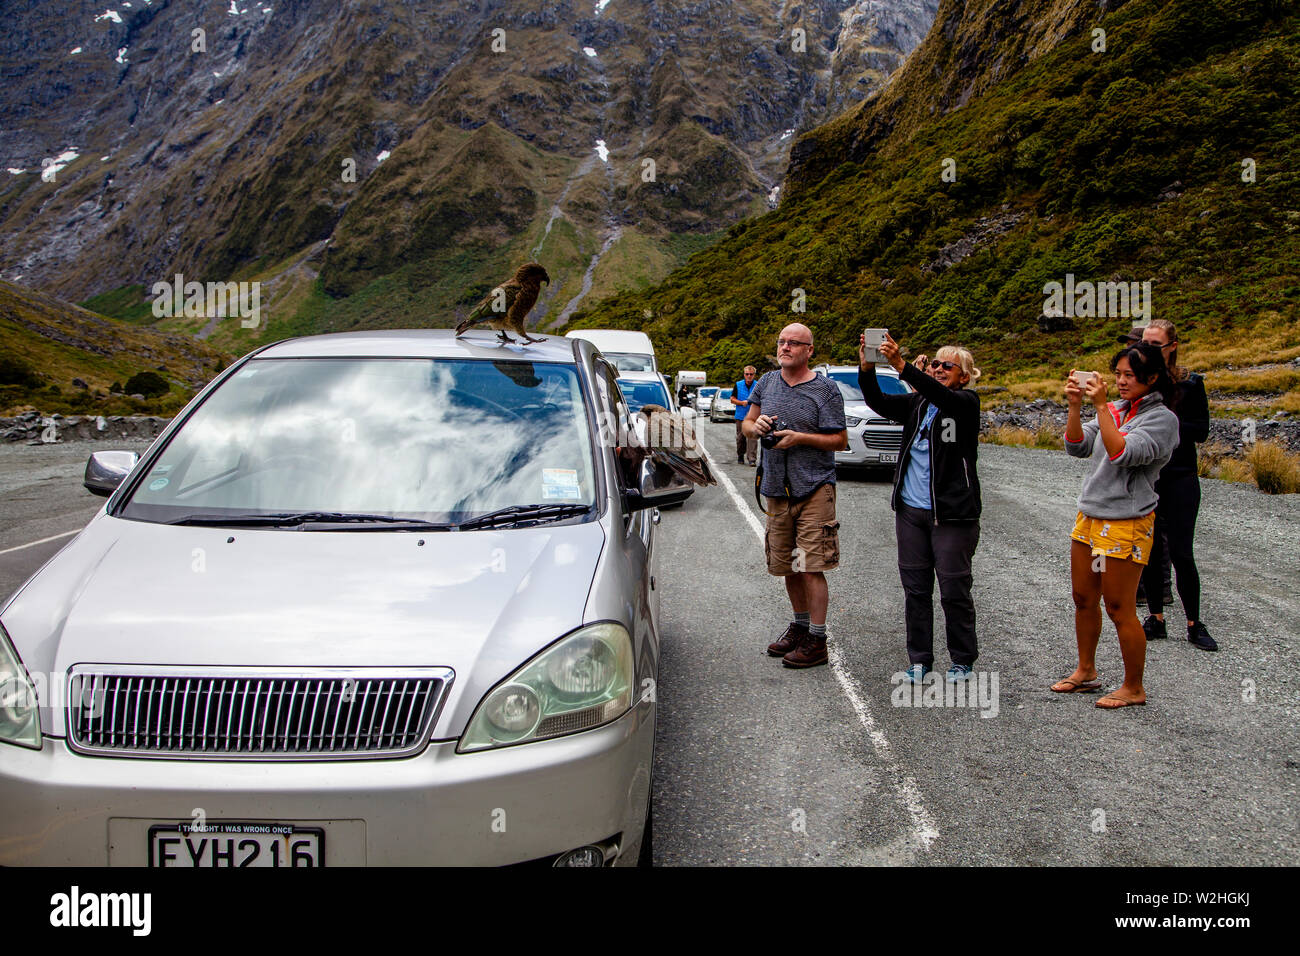 Visitors Take Photos Of The Mountain Parrots (Kea Birds) At The Entrance Of The Homer Tunnel, Fiordland National Park, South Island, New Zealand Stock Photo